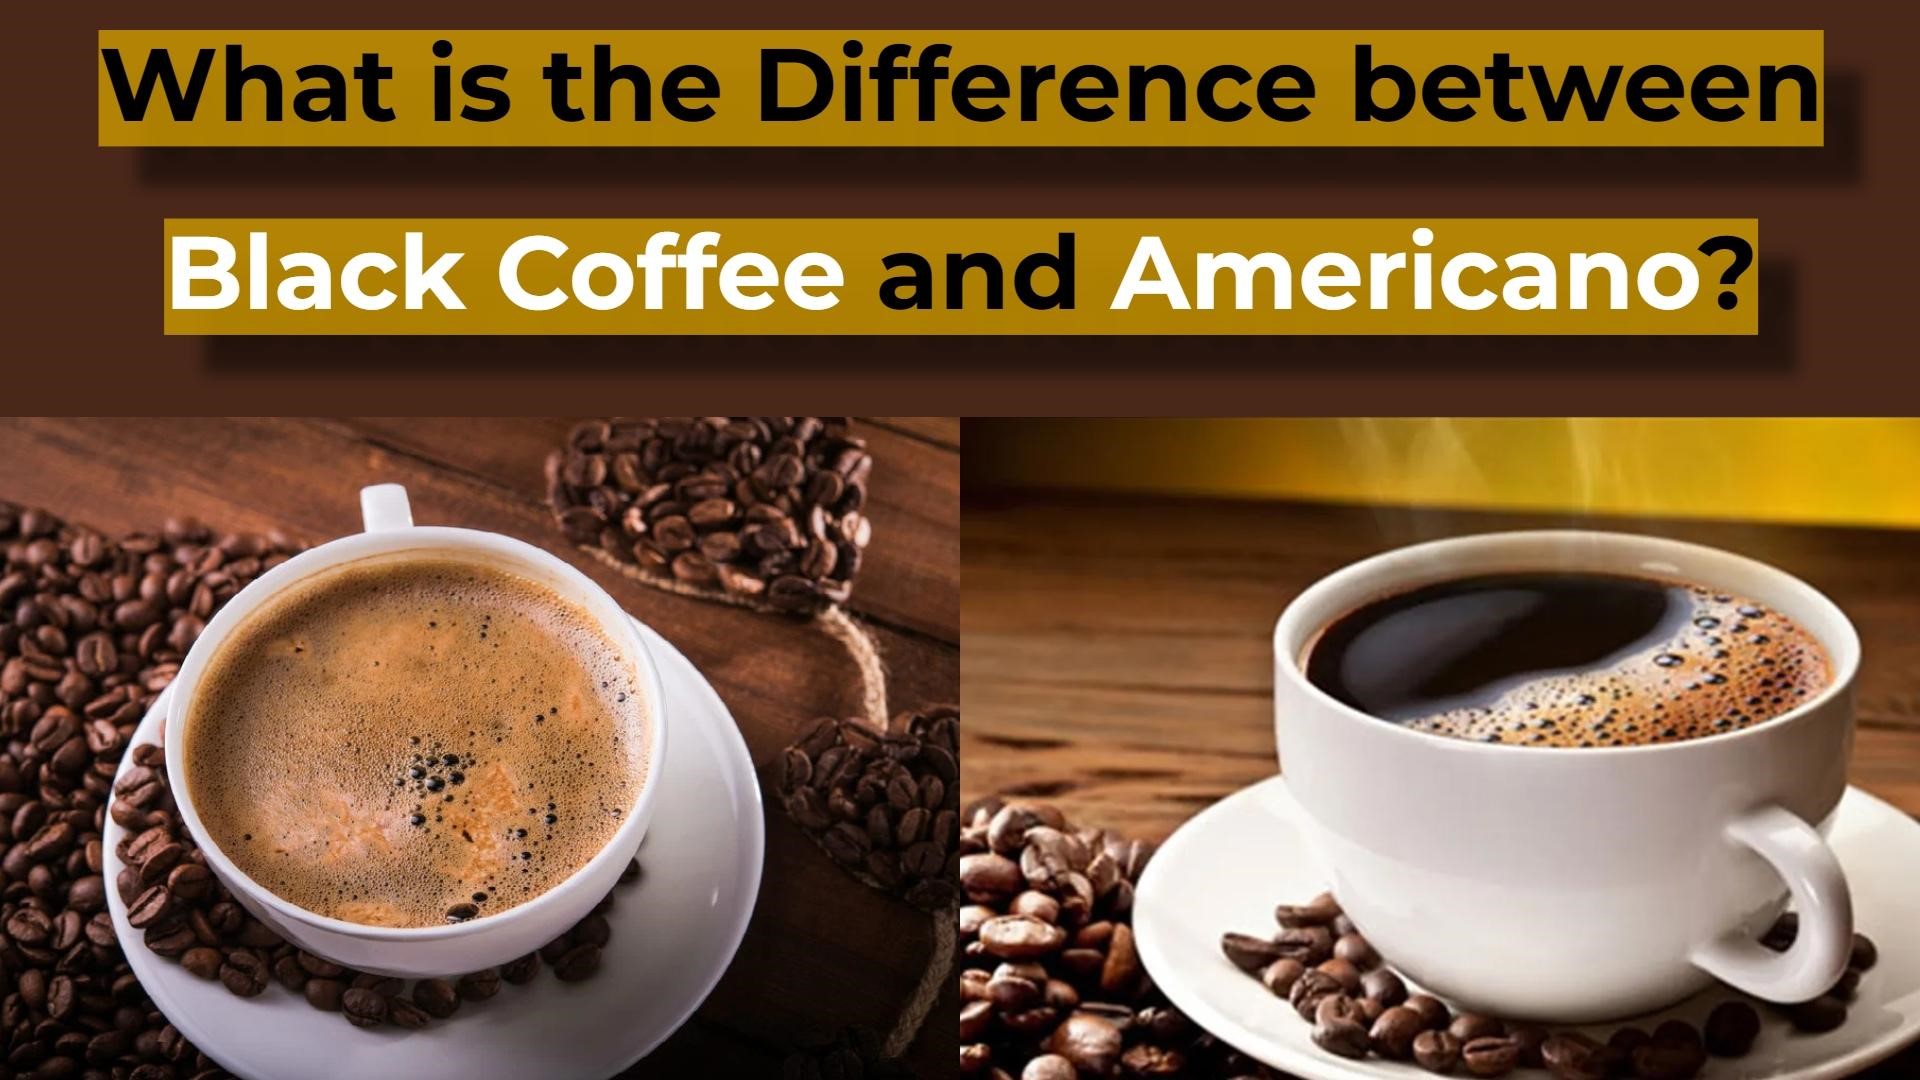 What is the Difference between Black Coffee and Americano